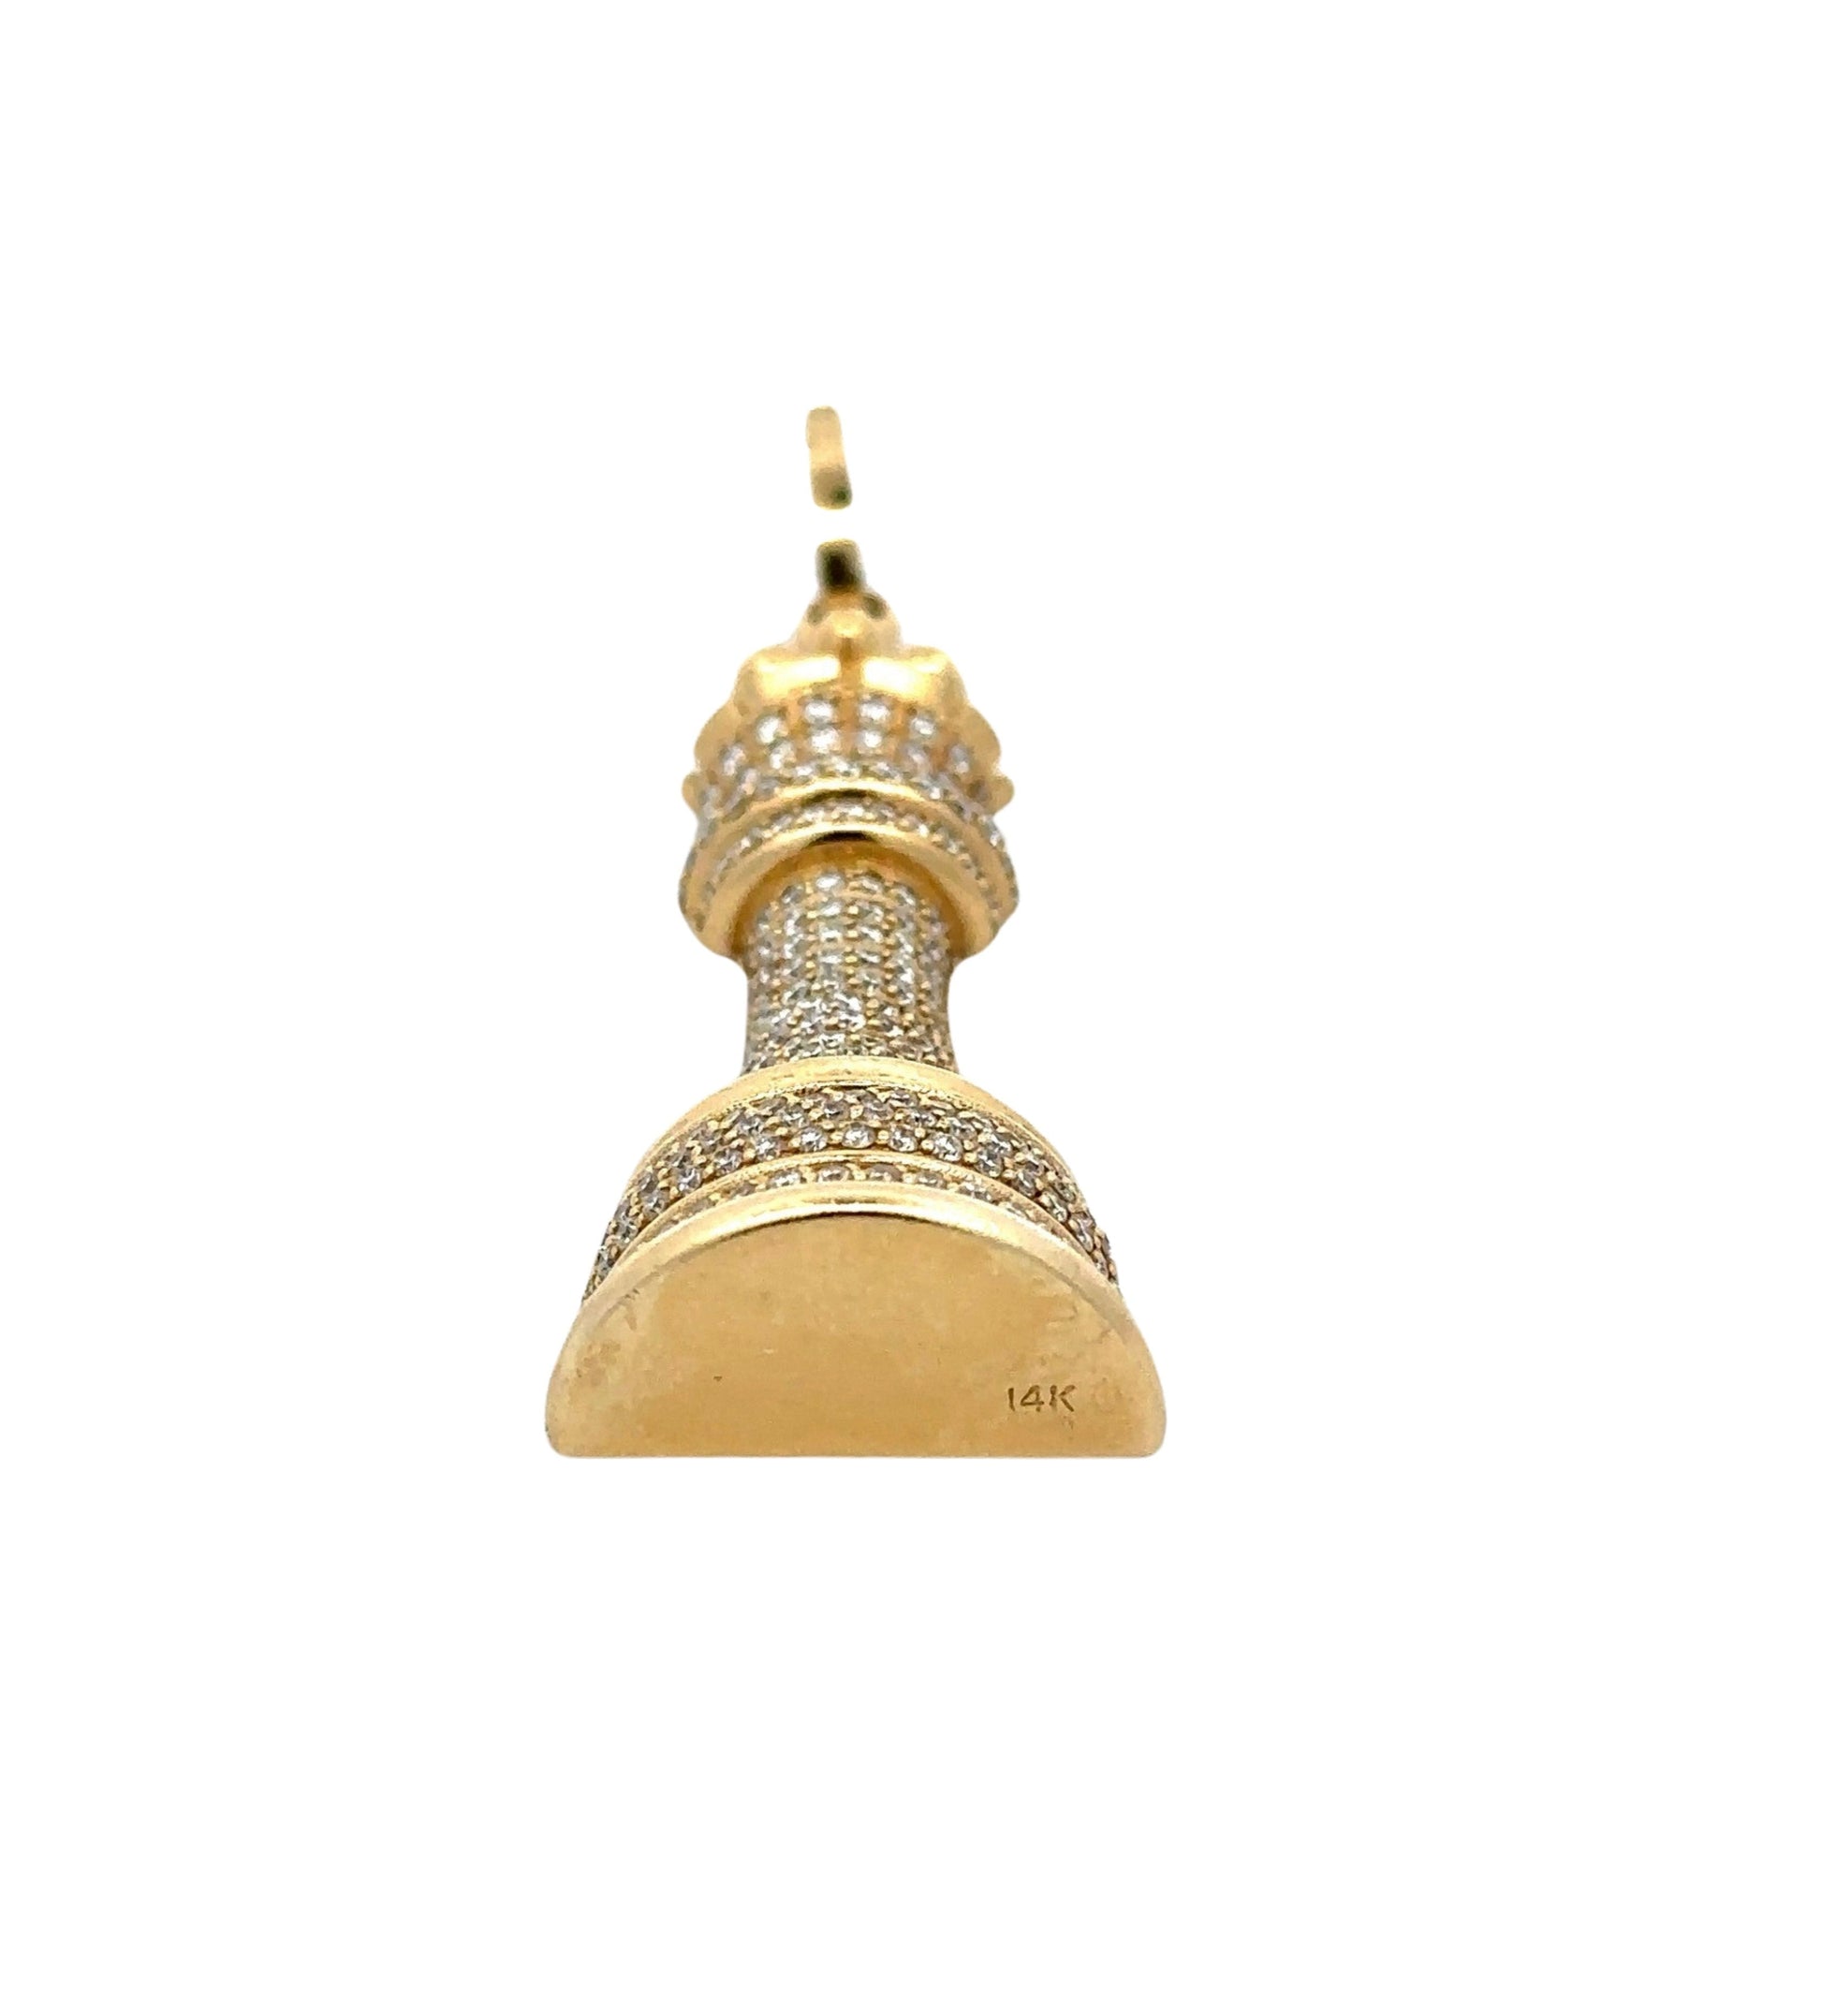 Bottom of chess pendant with 14K stamp on yellow gold